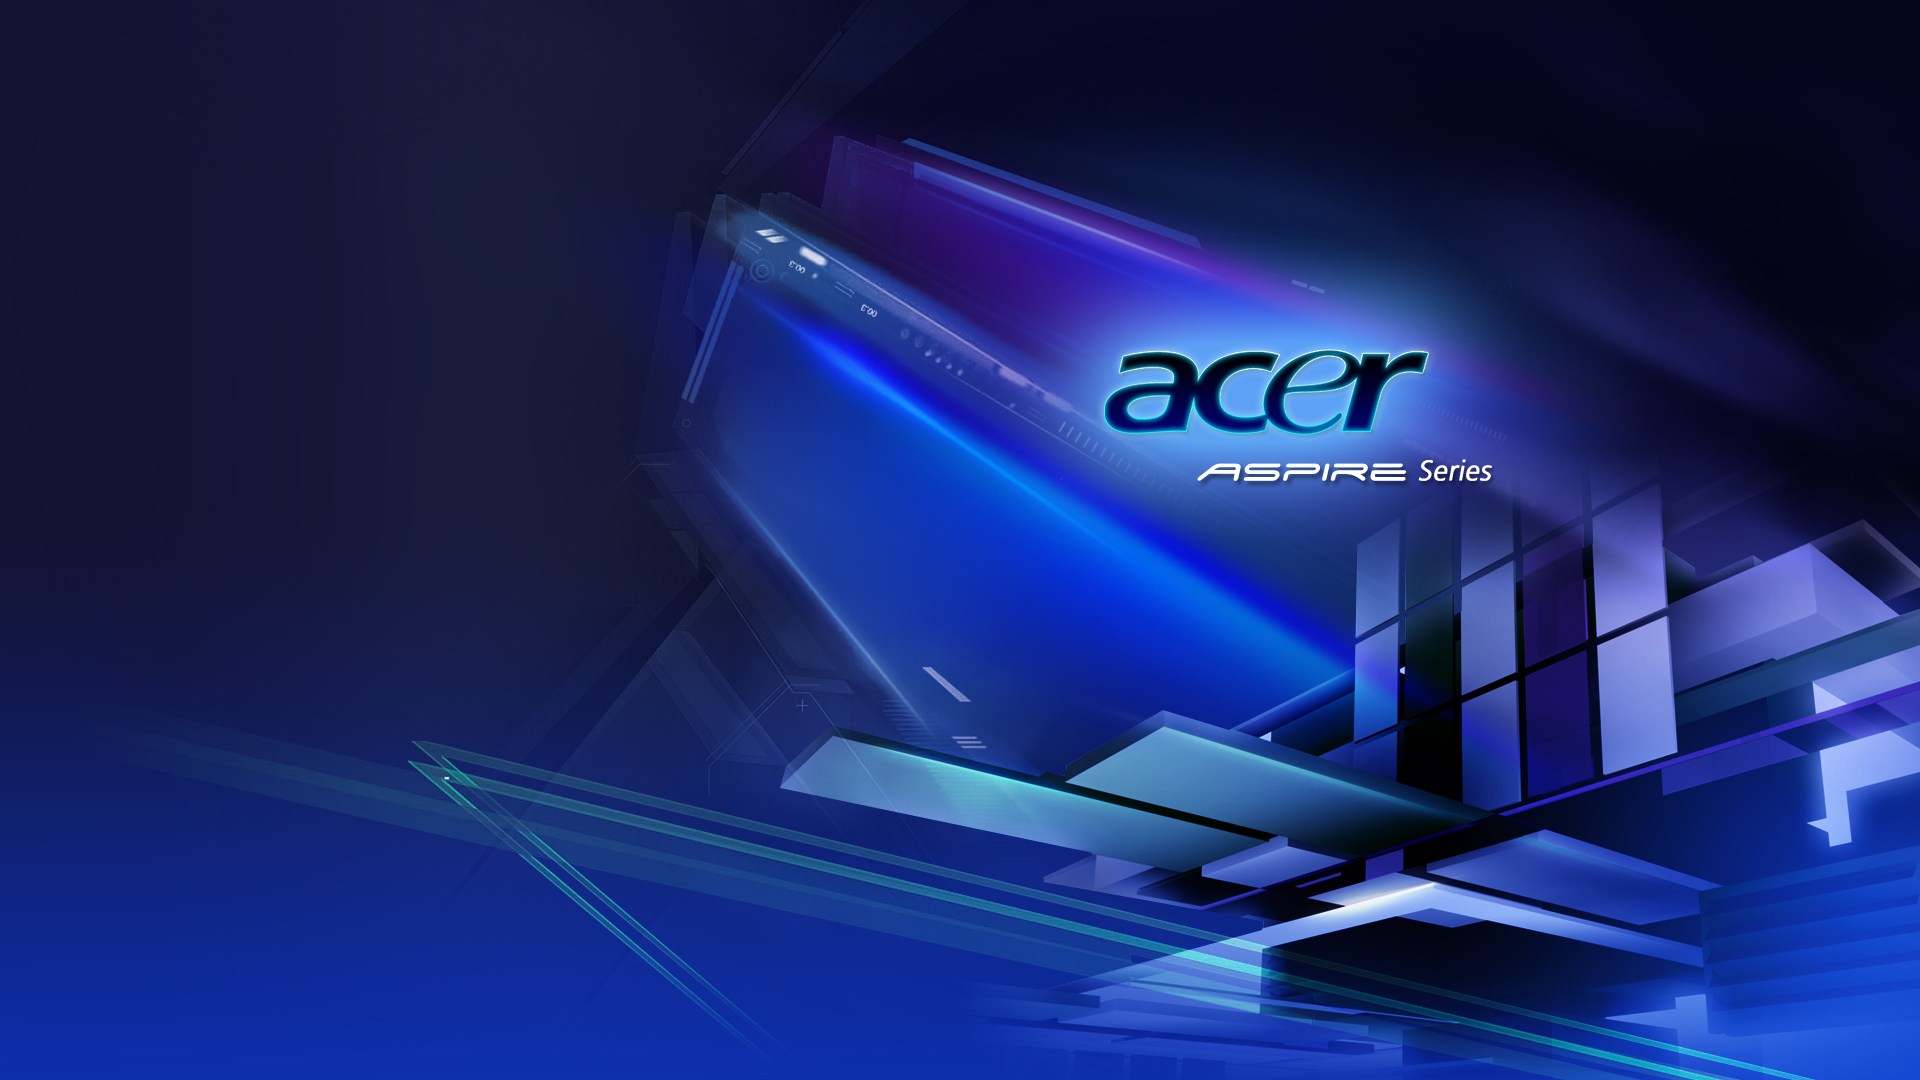 Original Acer Wallpapers and Acer Backgrounds Virus Removal